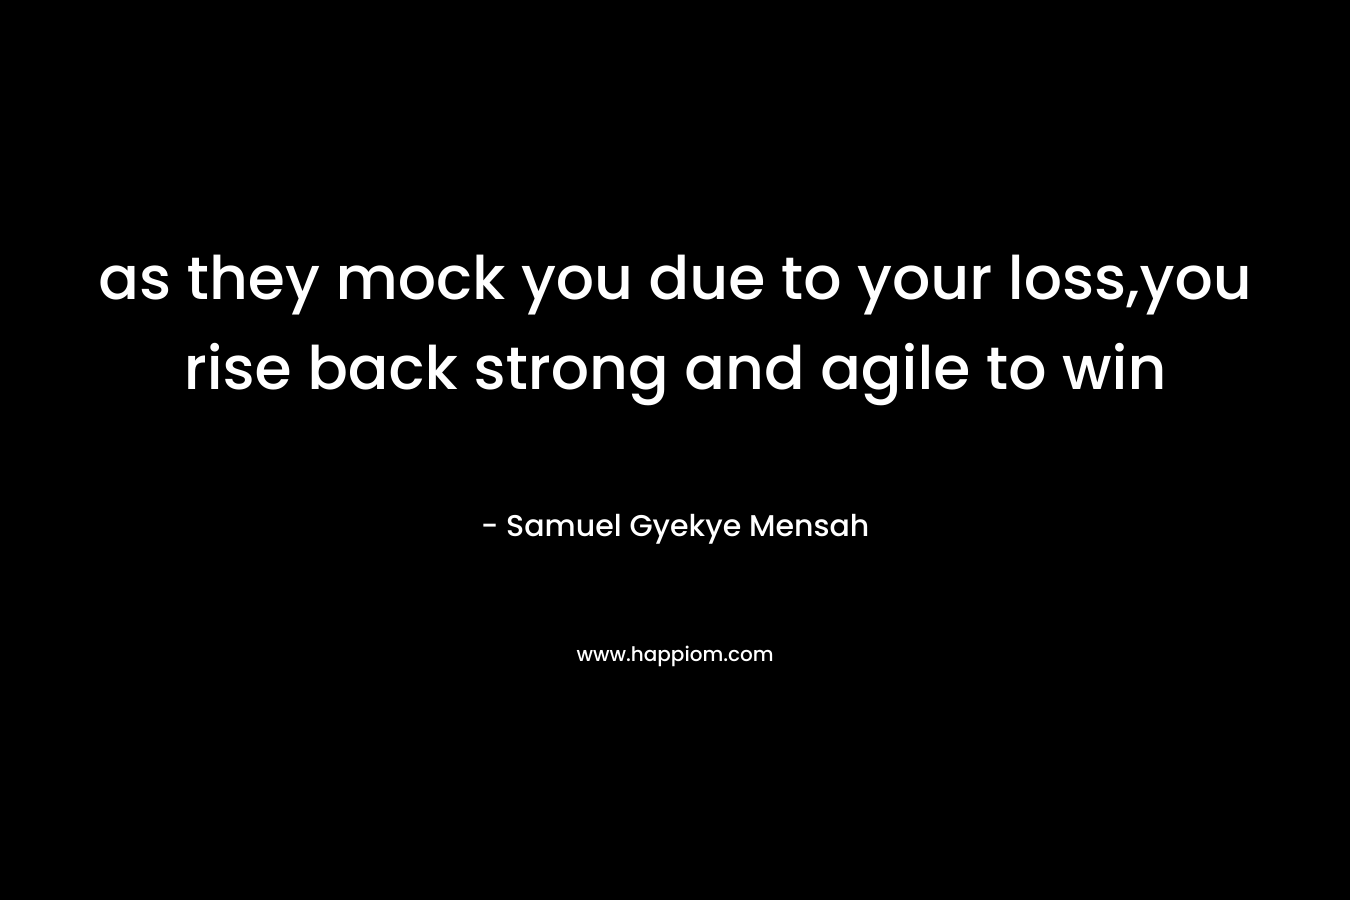 as they mock you due to your loss,you rise back strong and agile to win – Samuel Gyekye Mensah